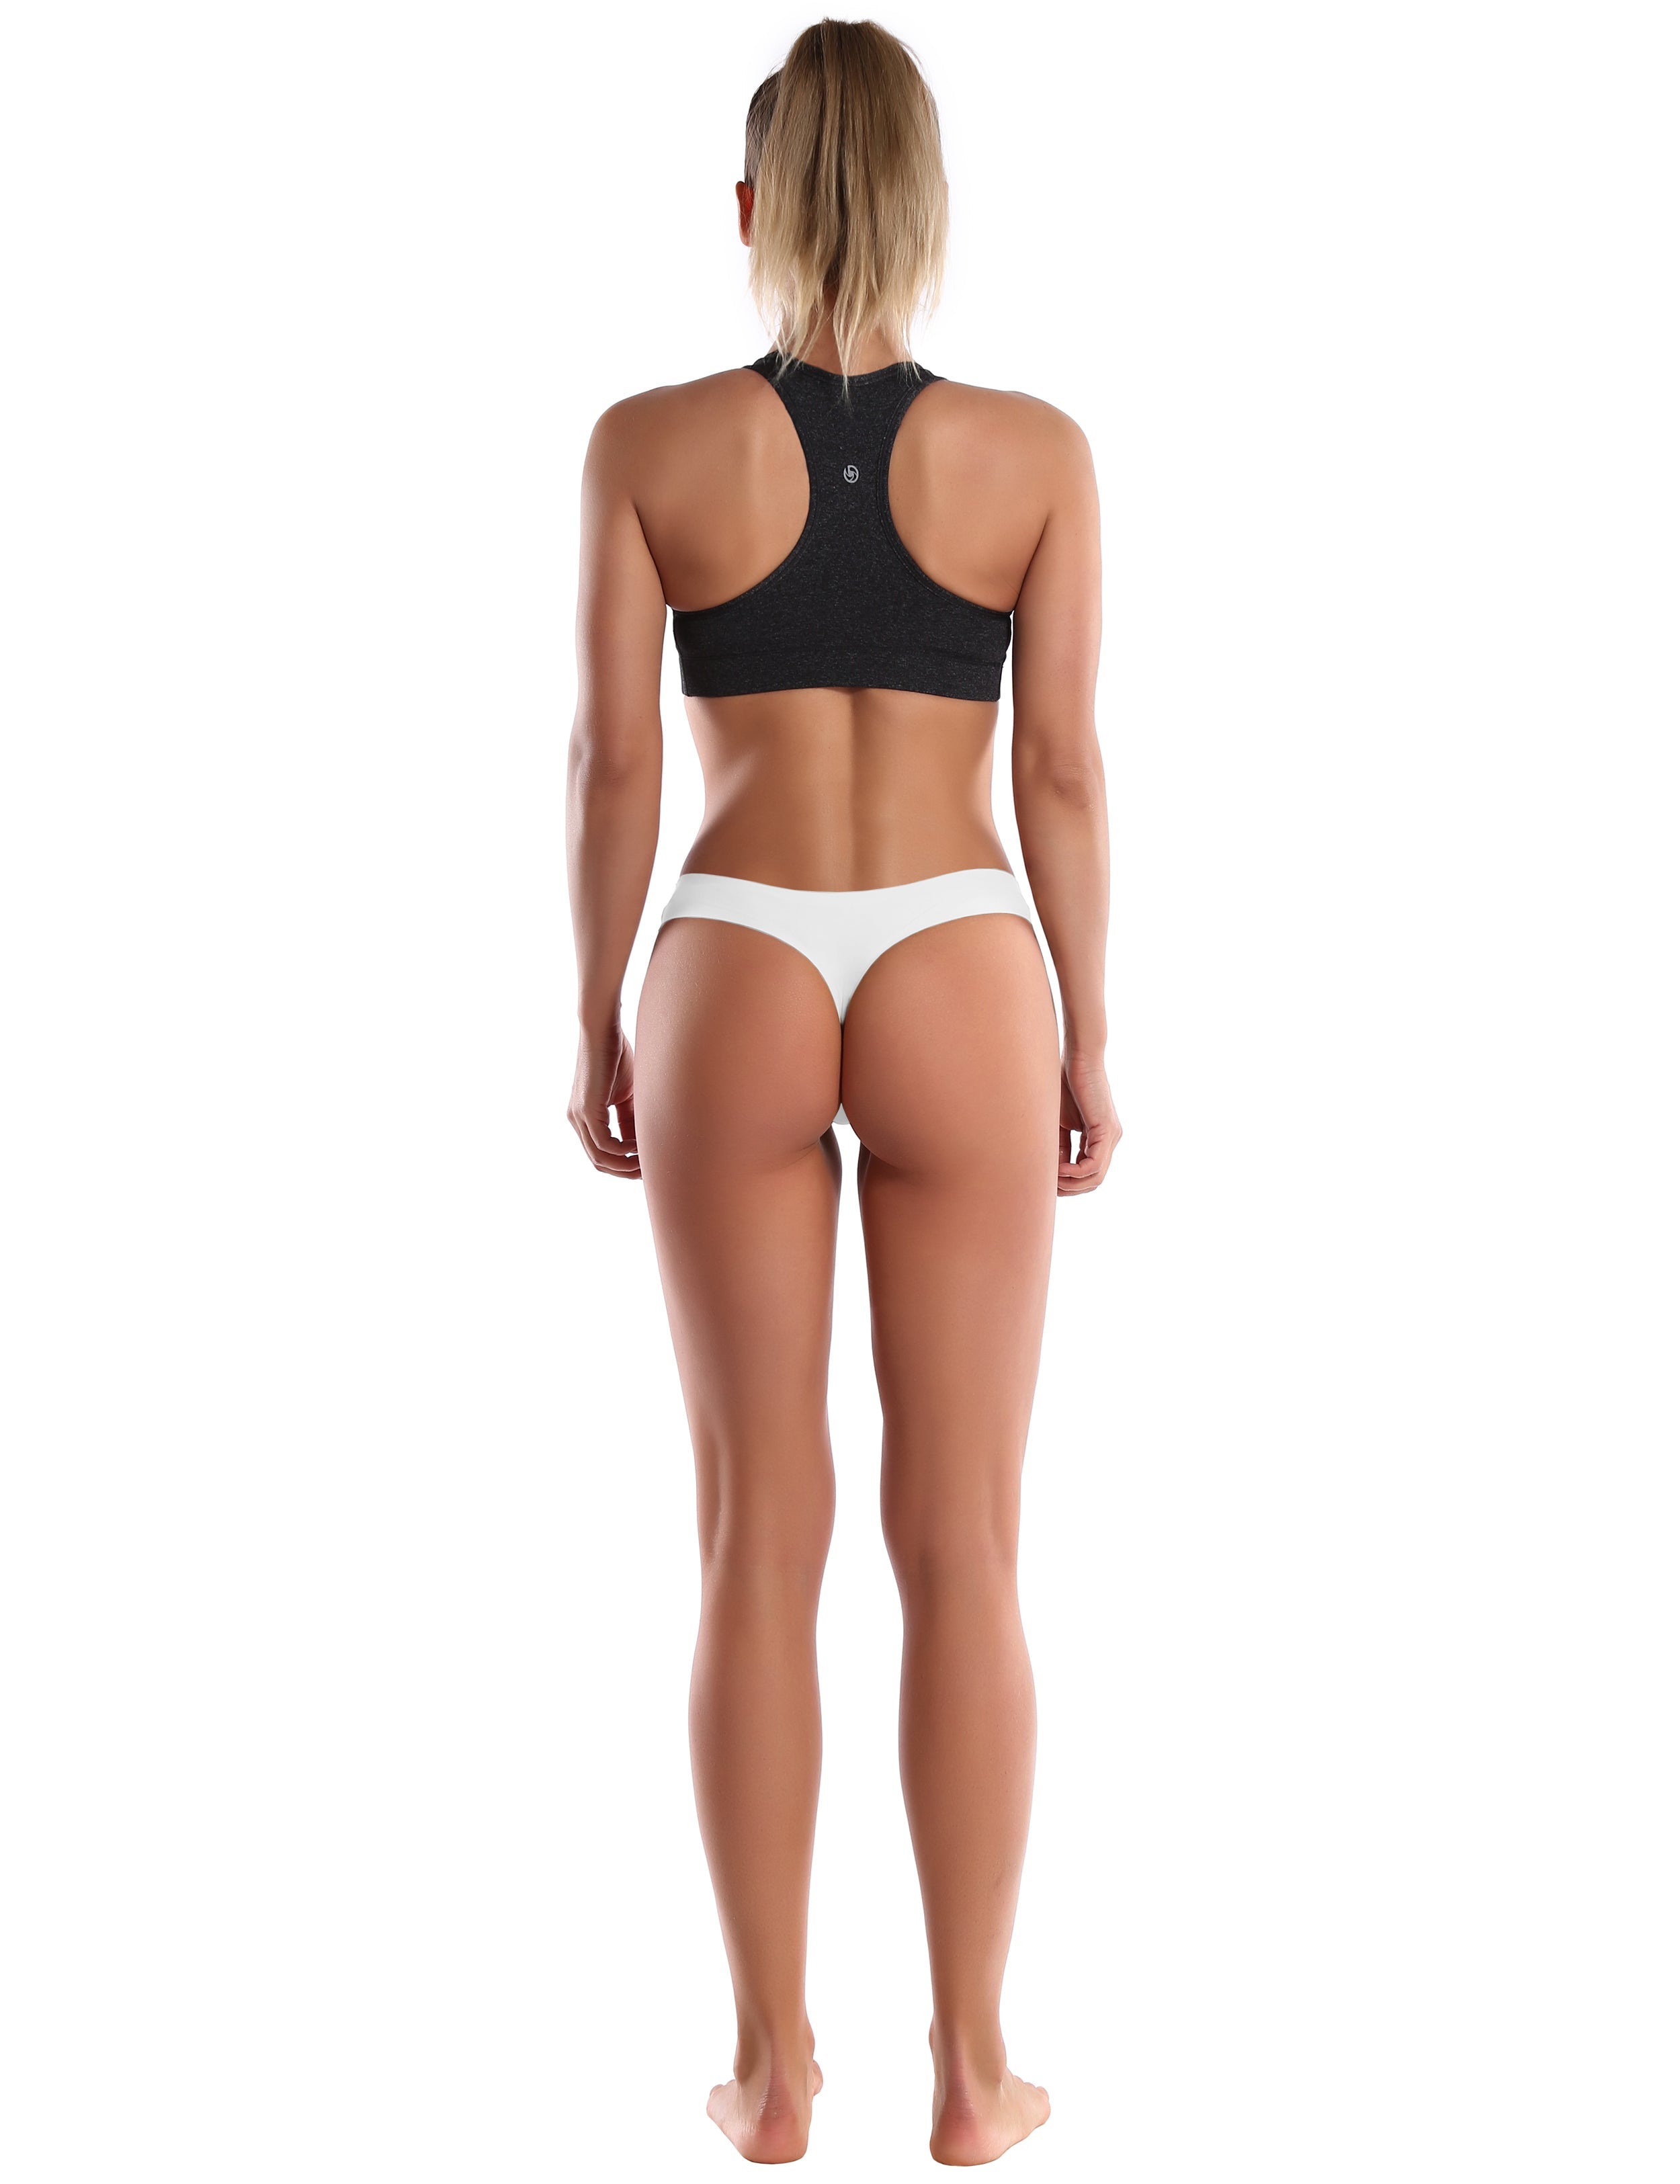 Invisibles Sport Thongs White Sleek, soft, smooth and totally comfortable: our newest thongs style is here. High elasticity High density Softest-ever fabric Laser cutting Unsealed Comfortable No panty lines Machine wash 95% Nylon, 5% Spandex